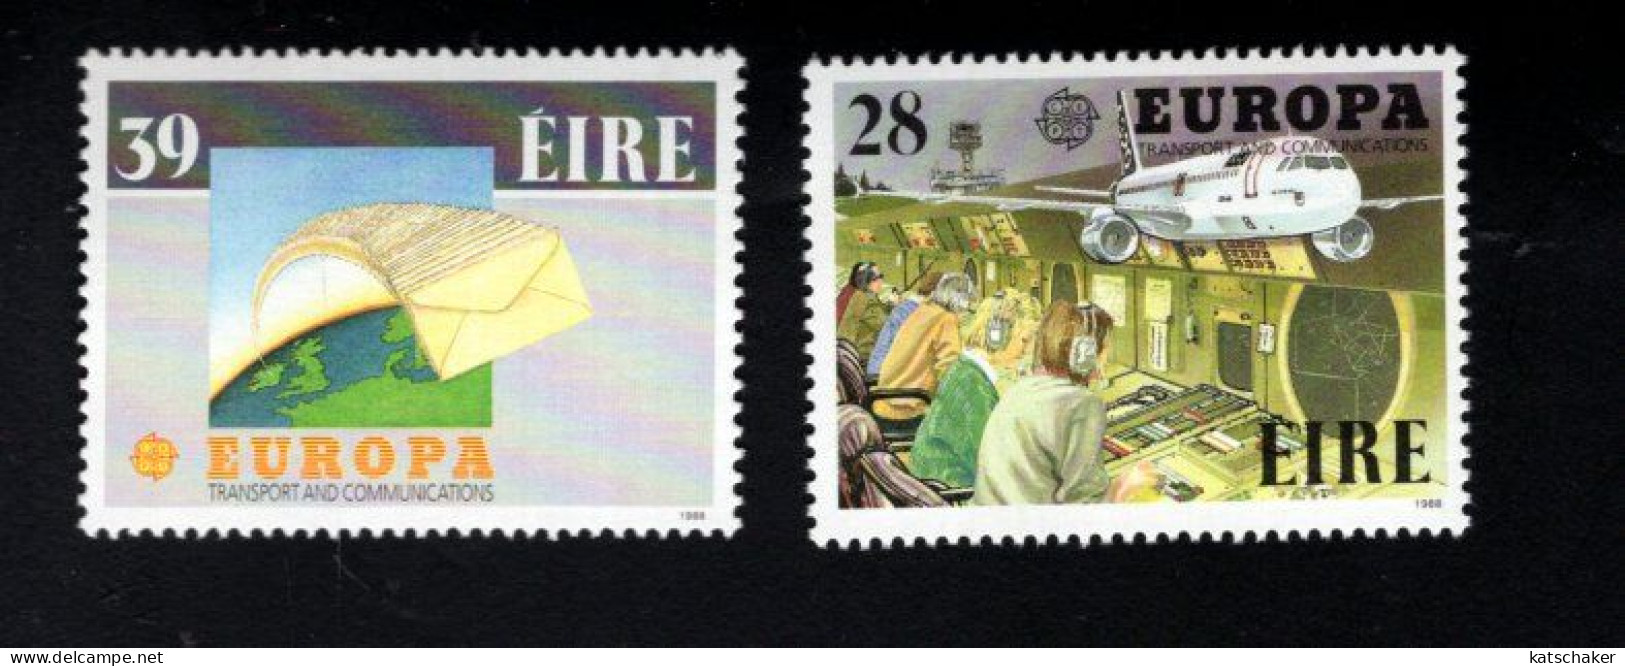 1997019473 1988  SCOTT 717 718 (XX) POSTFRIS  MINT NEVER HINGED - EUROPA ISSUE - AIRTRAFIC CONTROLLERS - EUROPE ON GLOBE - Neufs